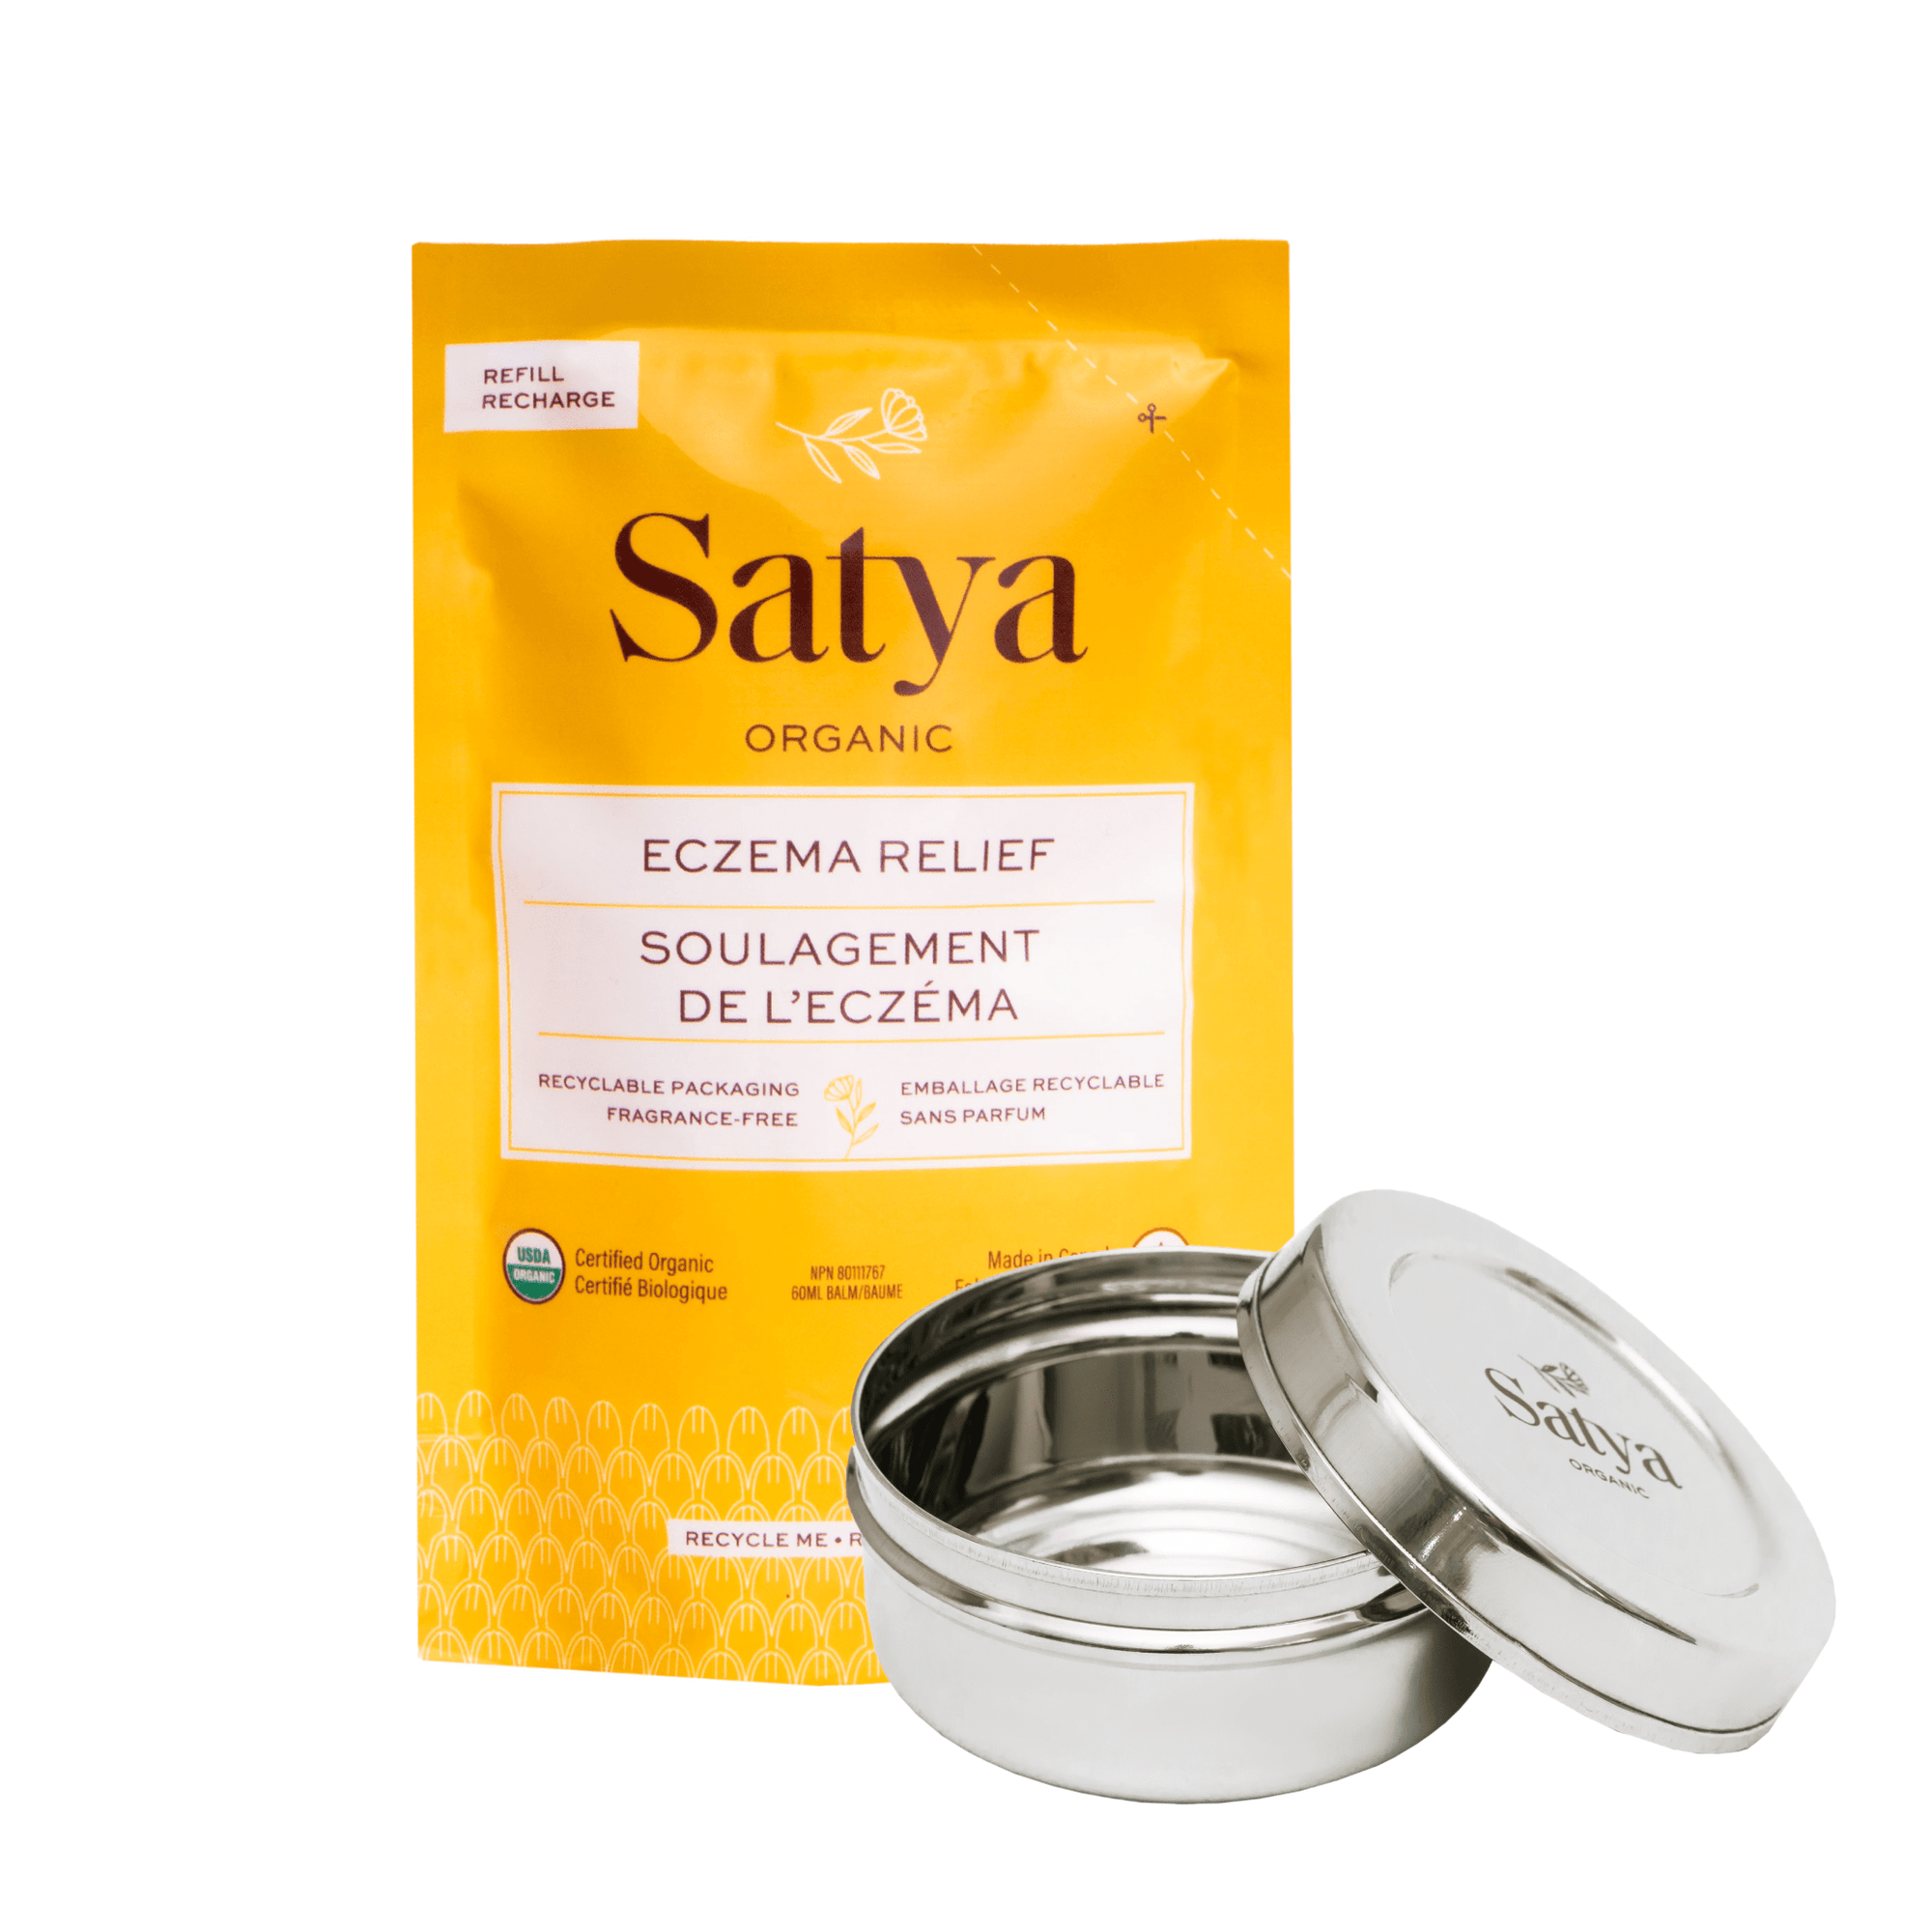 Satya Organic Eczema Relief refill pouch and a Satya Stainless Steel container